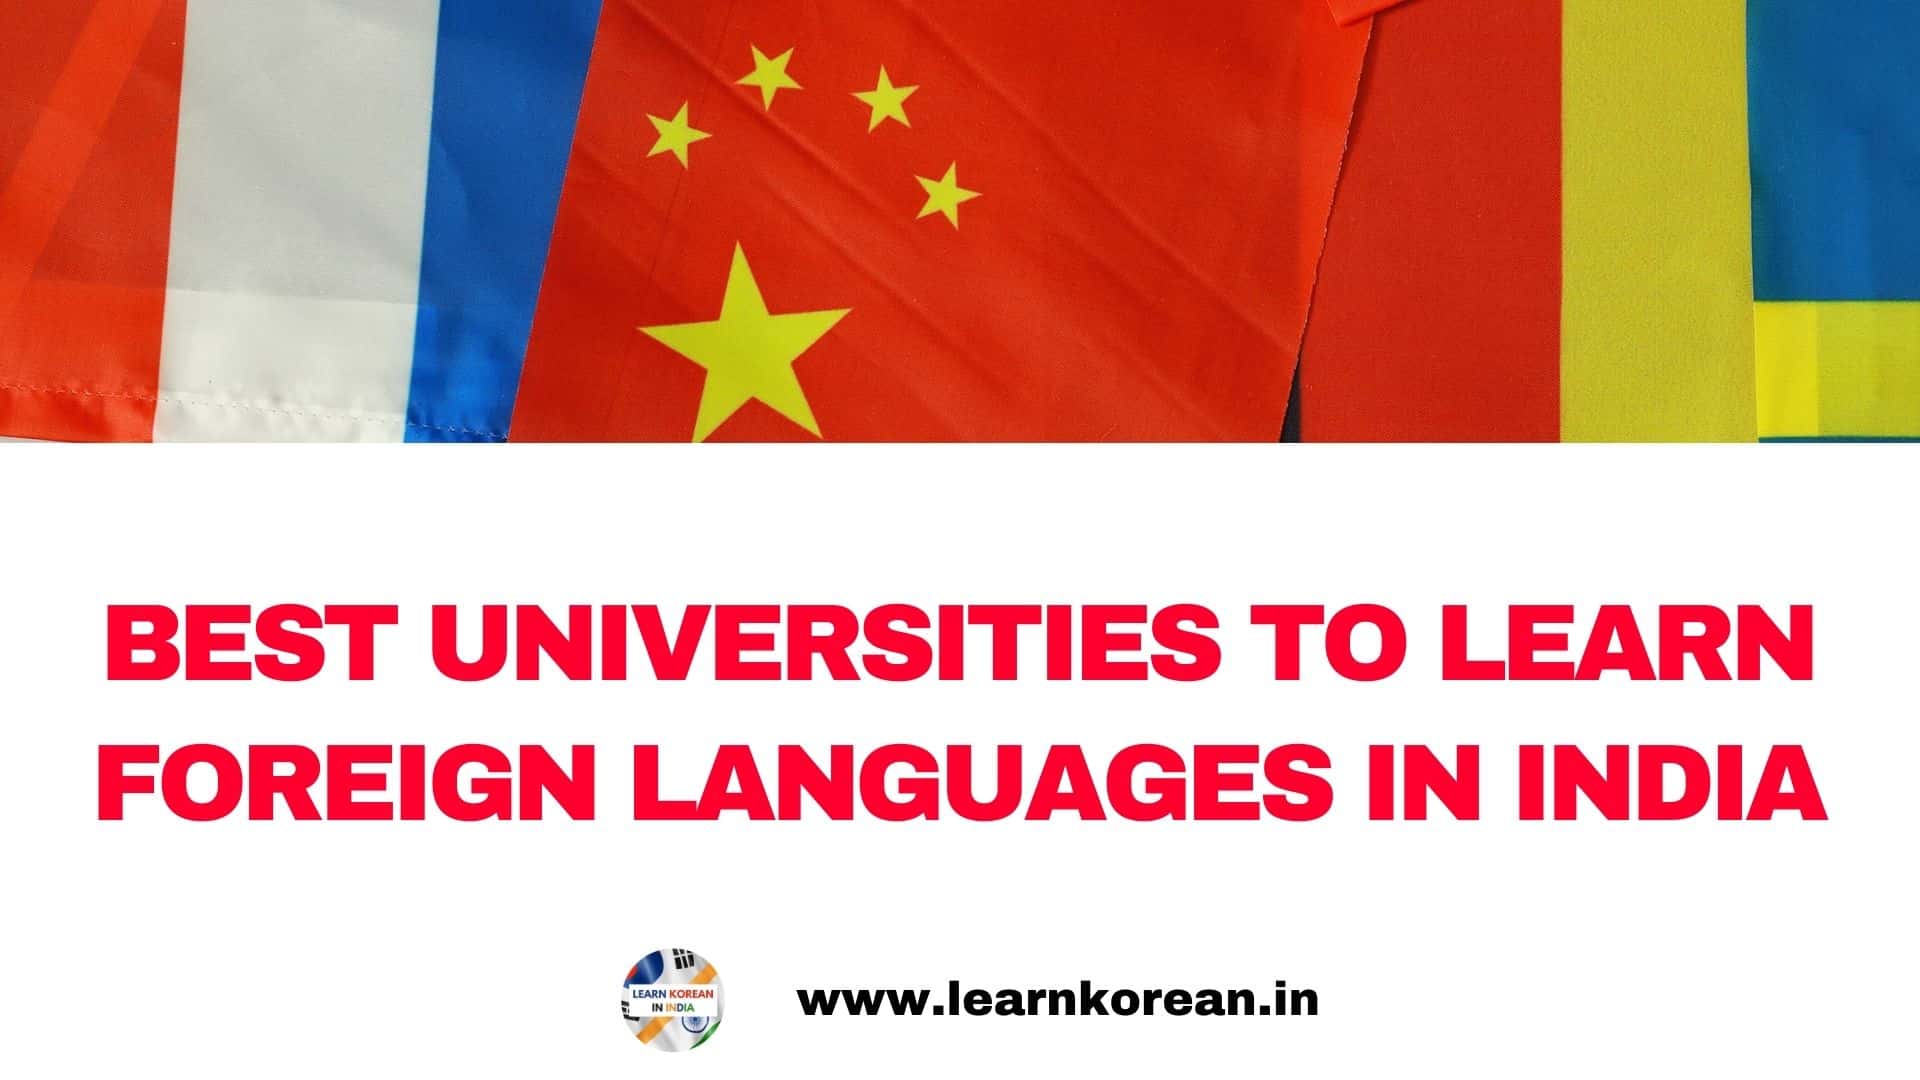 Best universities to learn foreign languages in India